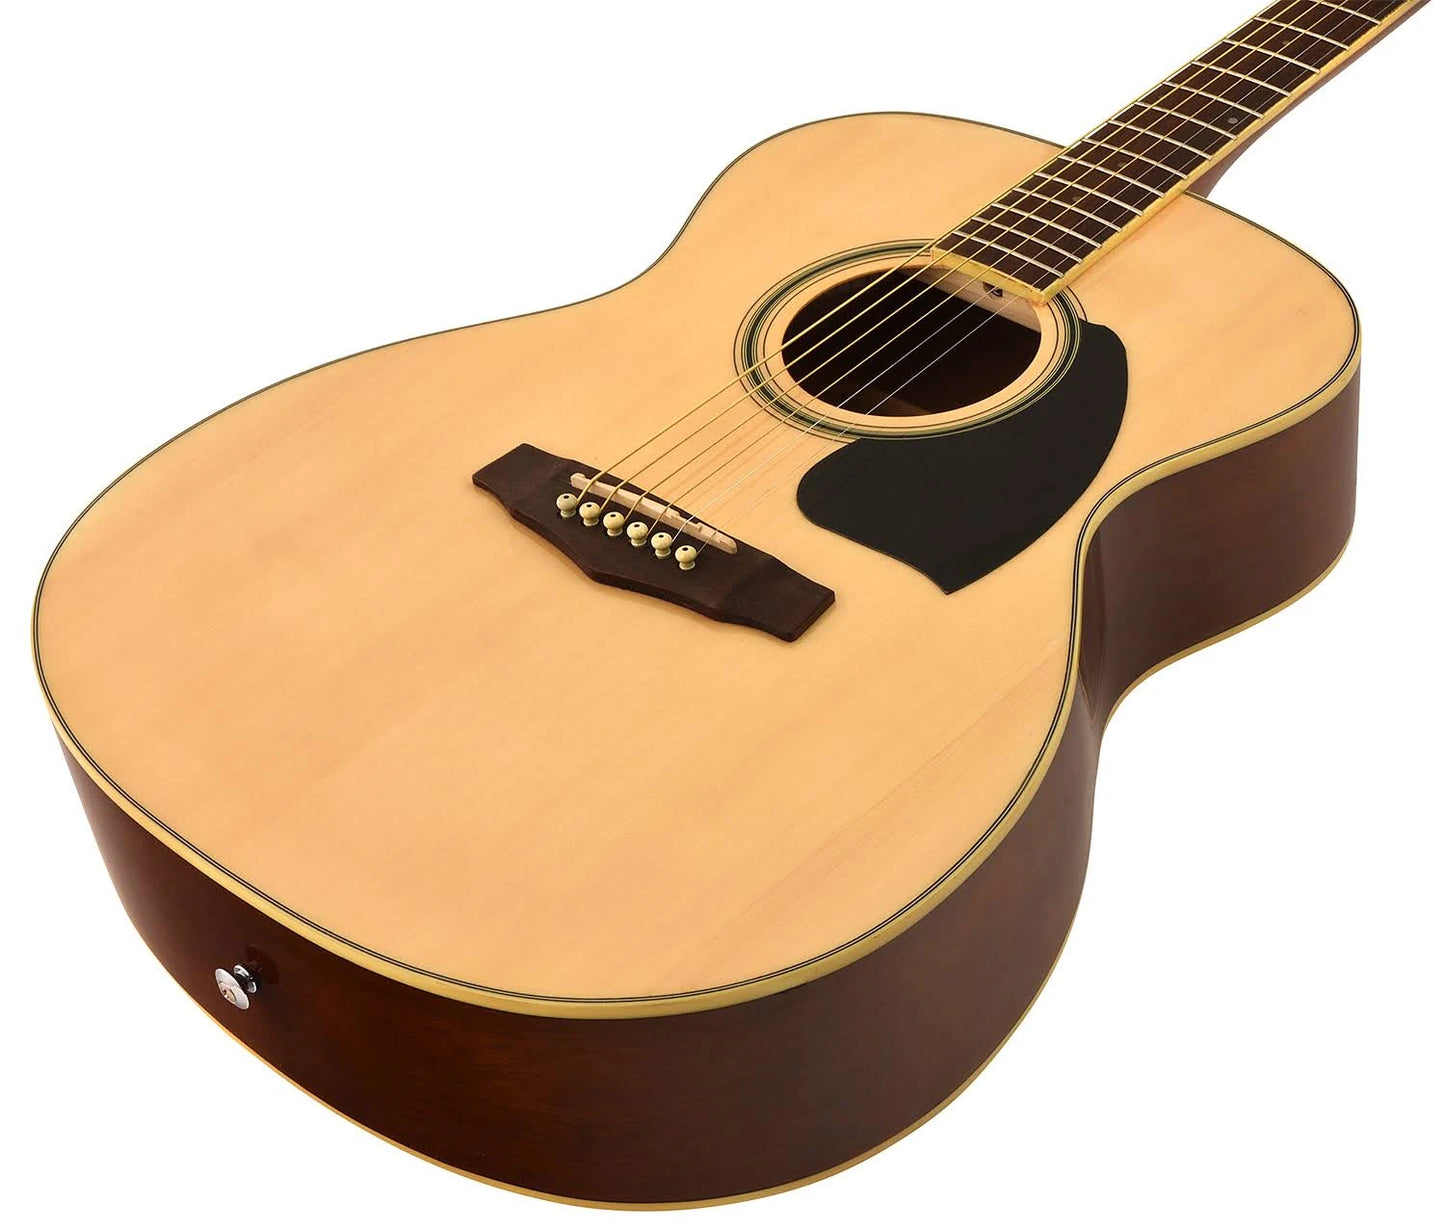 Ibanez PC15 Acoustic Guitar in Natural